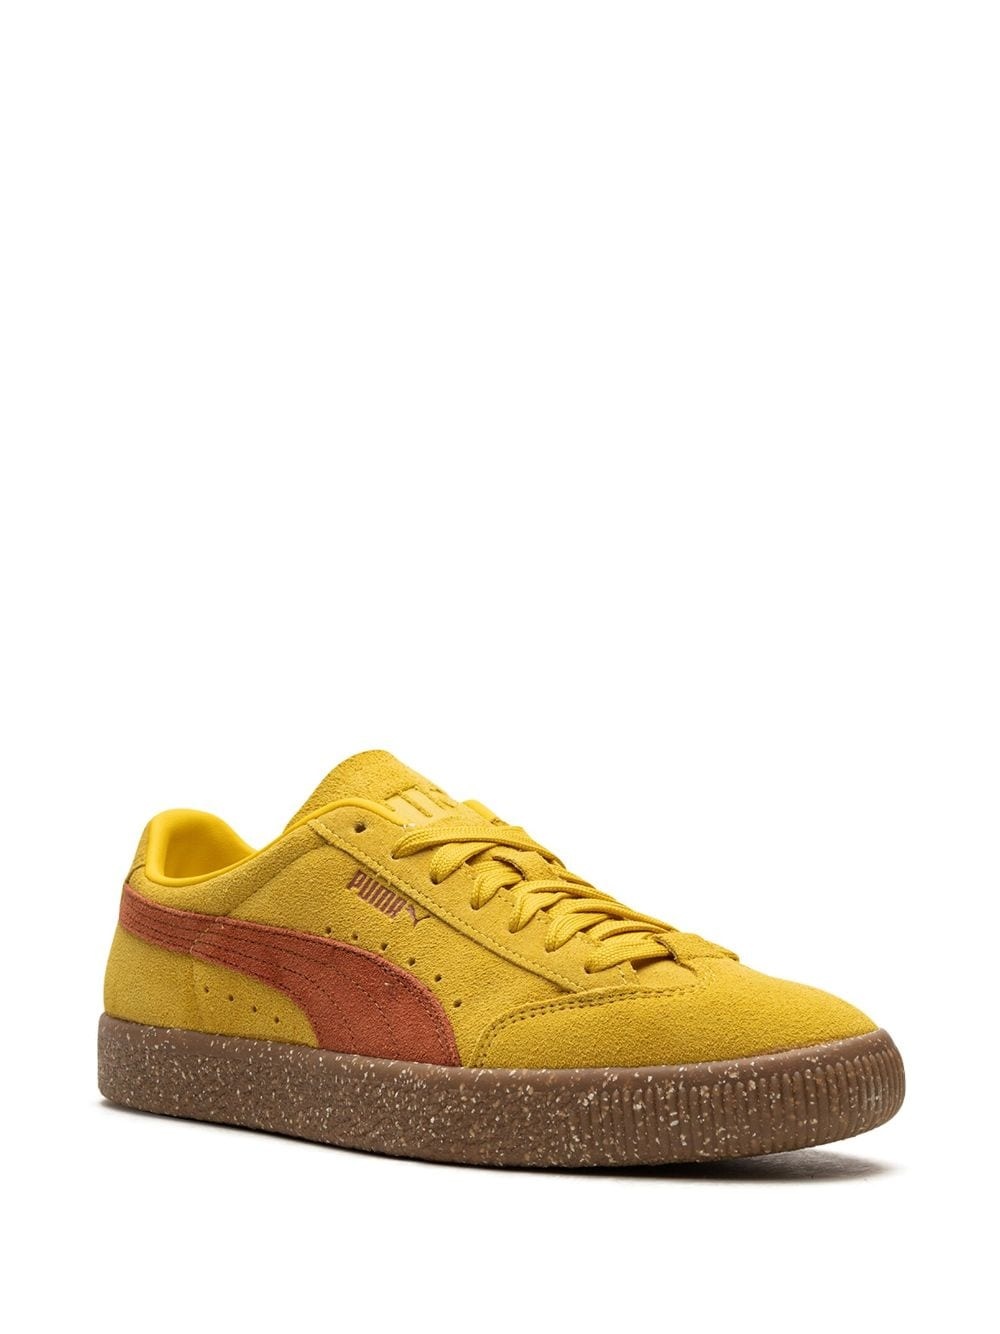 x P.A.M Suede VTG sneakers - 2